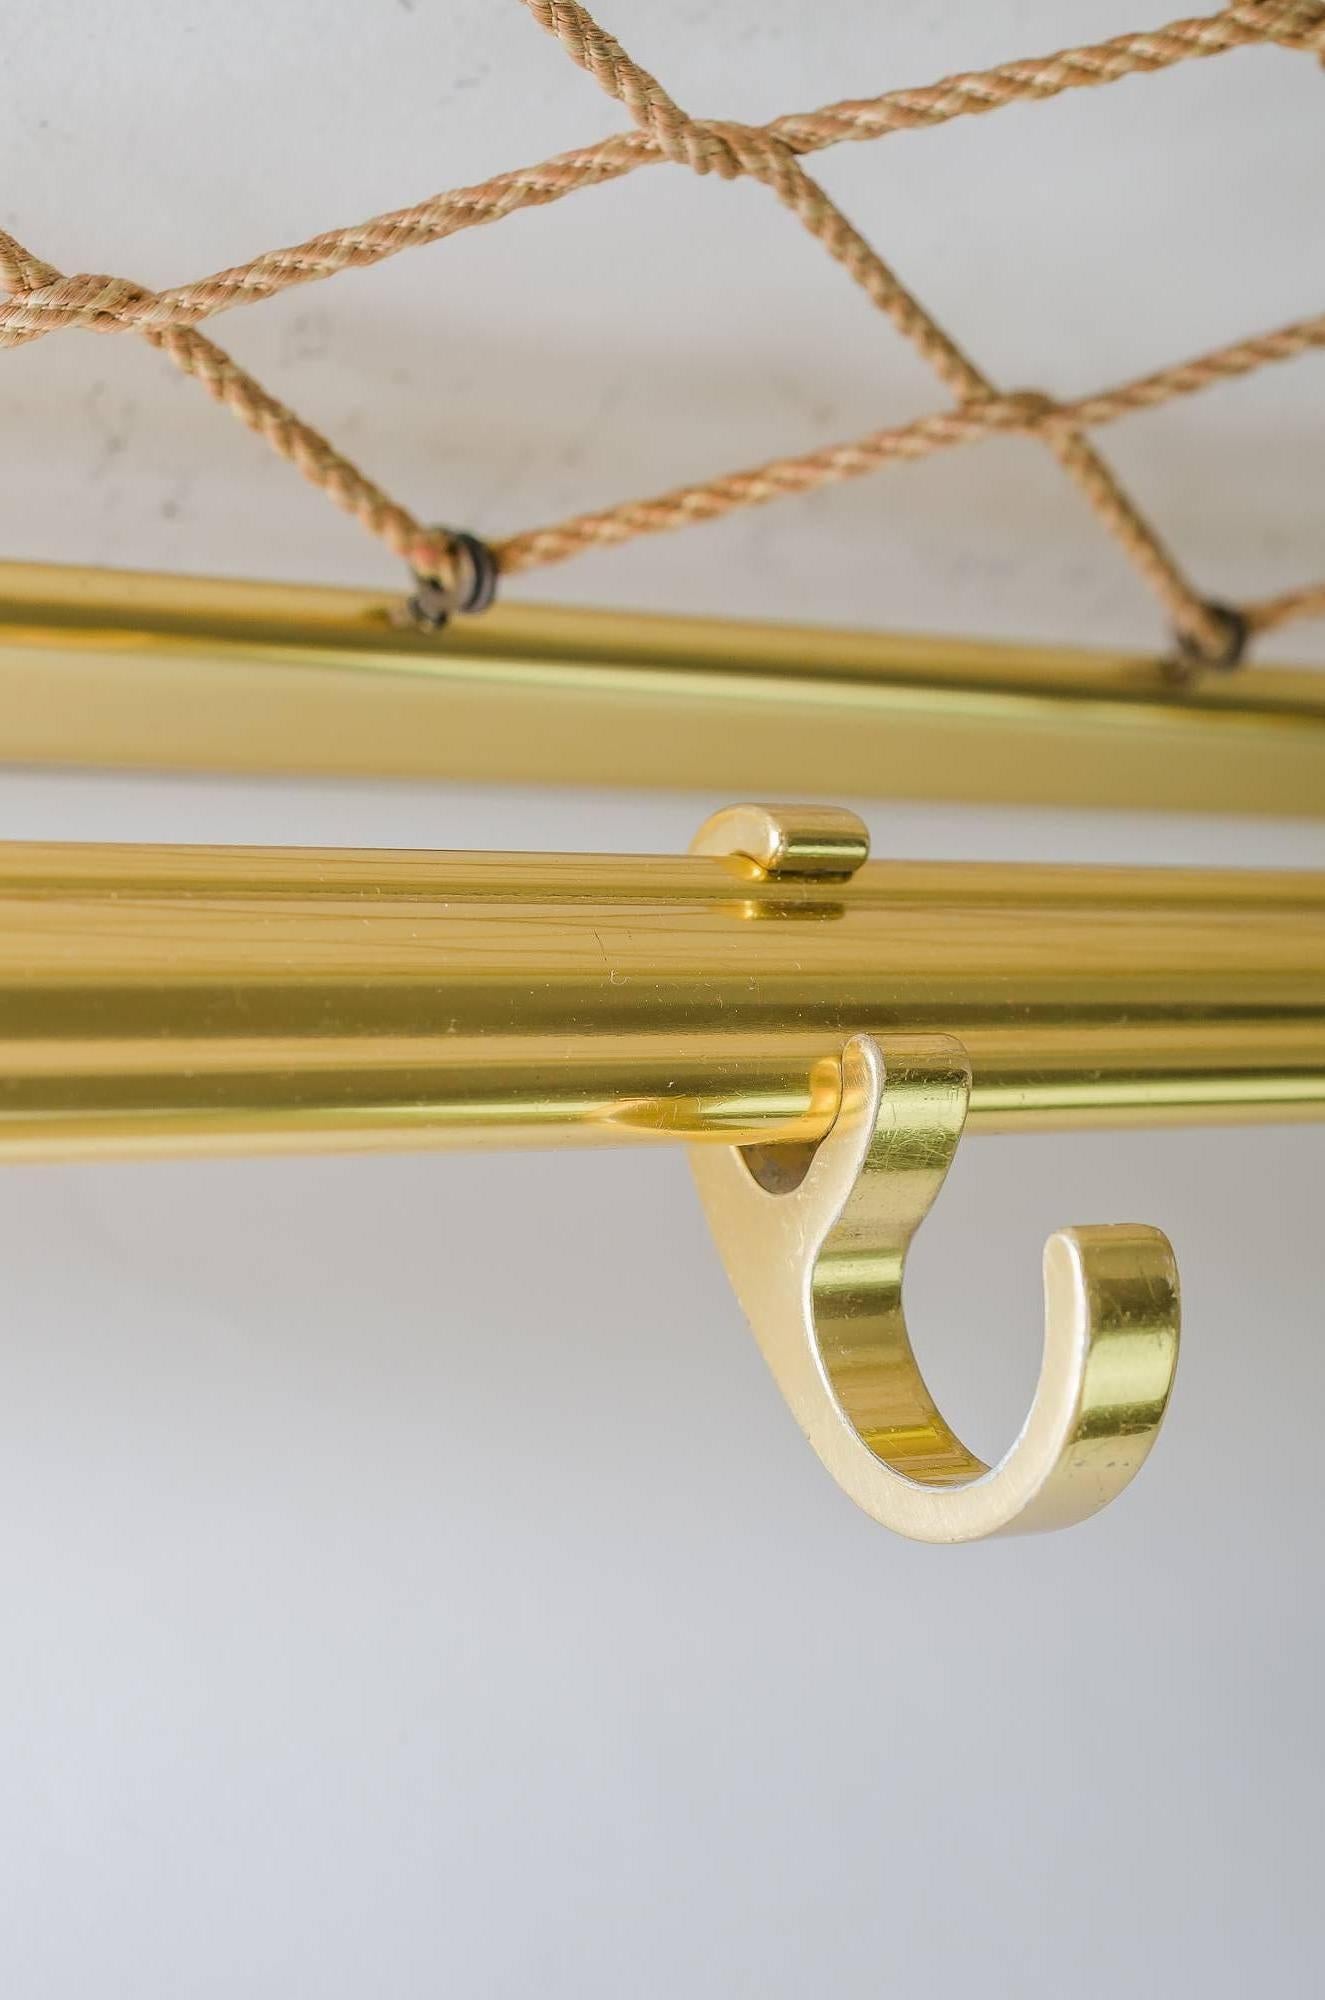 Coat Hat Rack Mid-Century Modern In Excellent Condition For Sale In Wien, AT